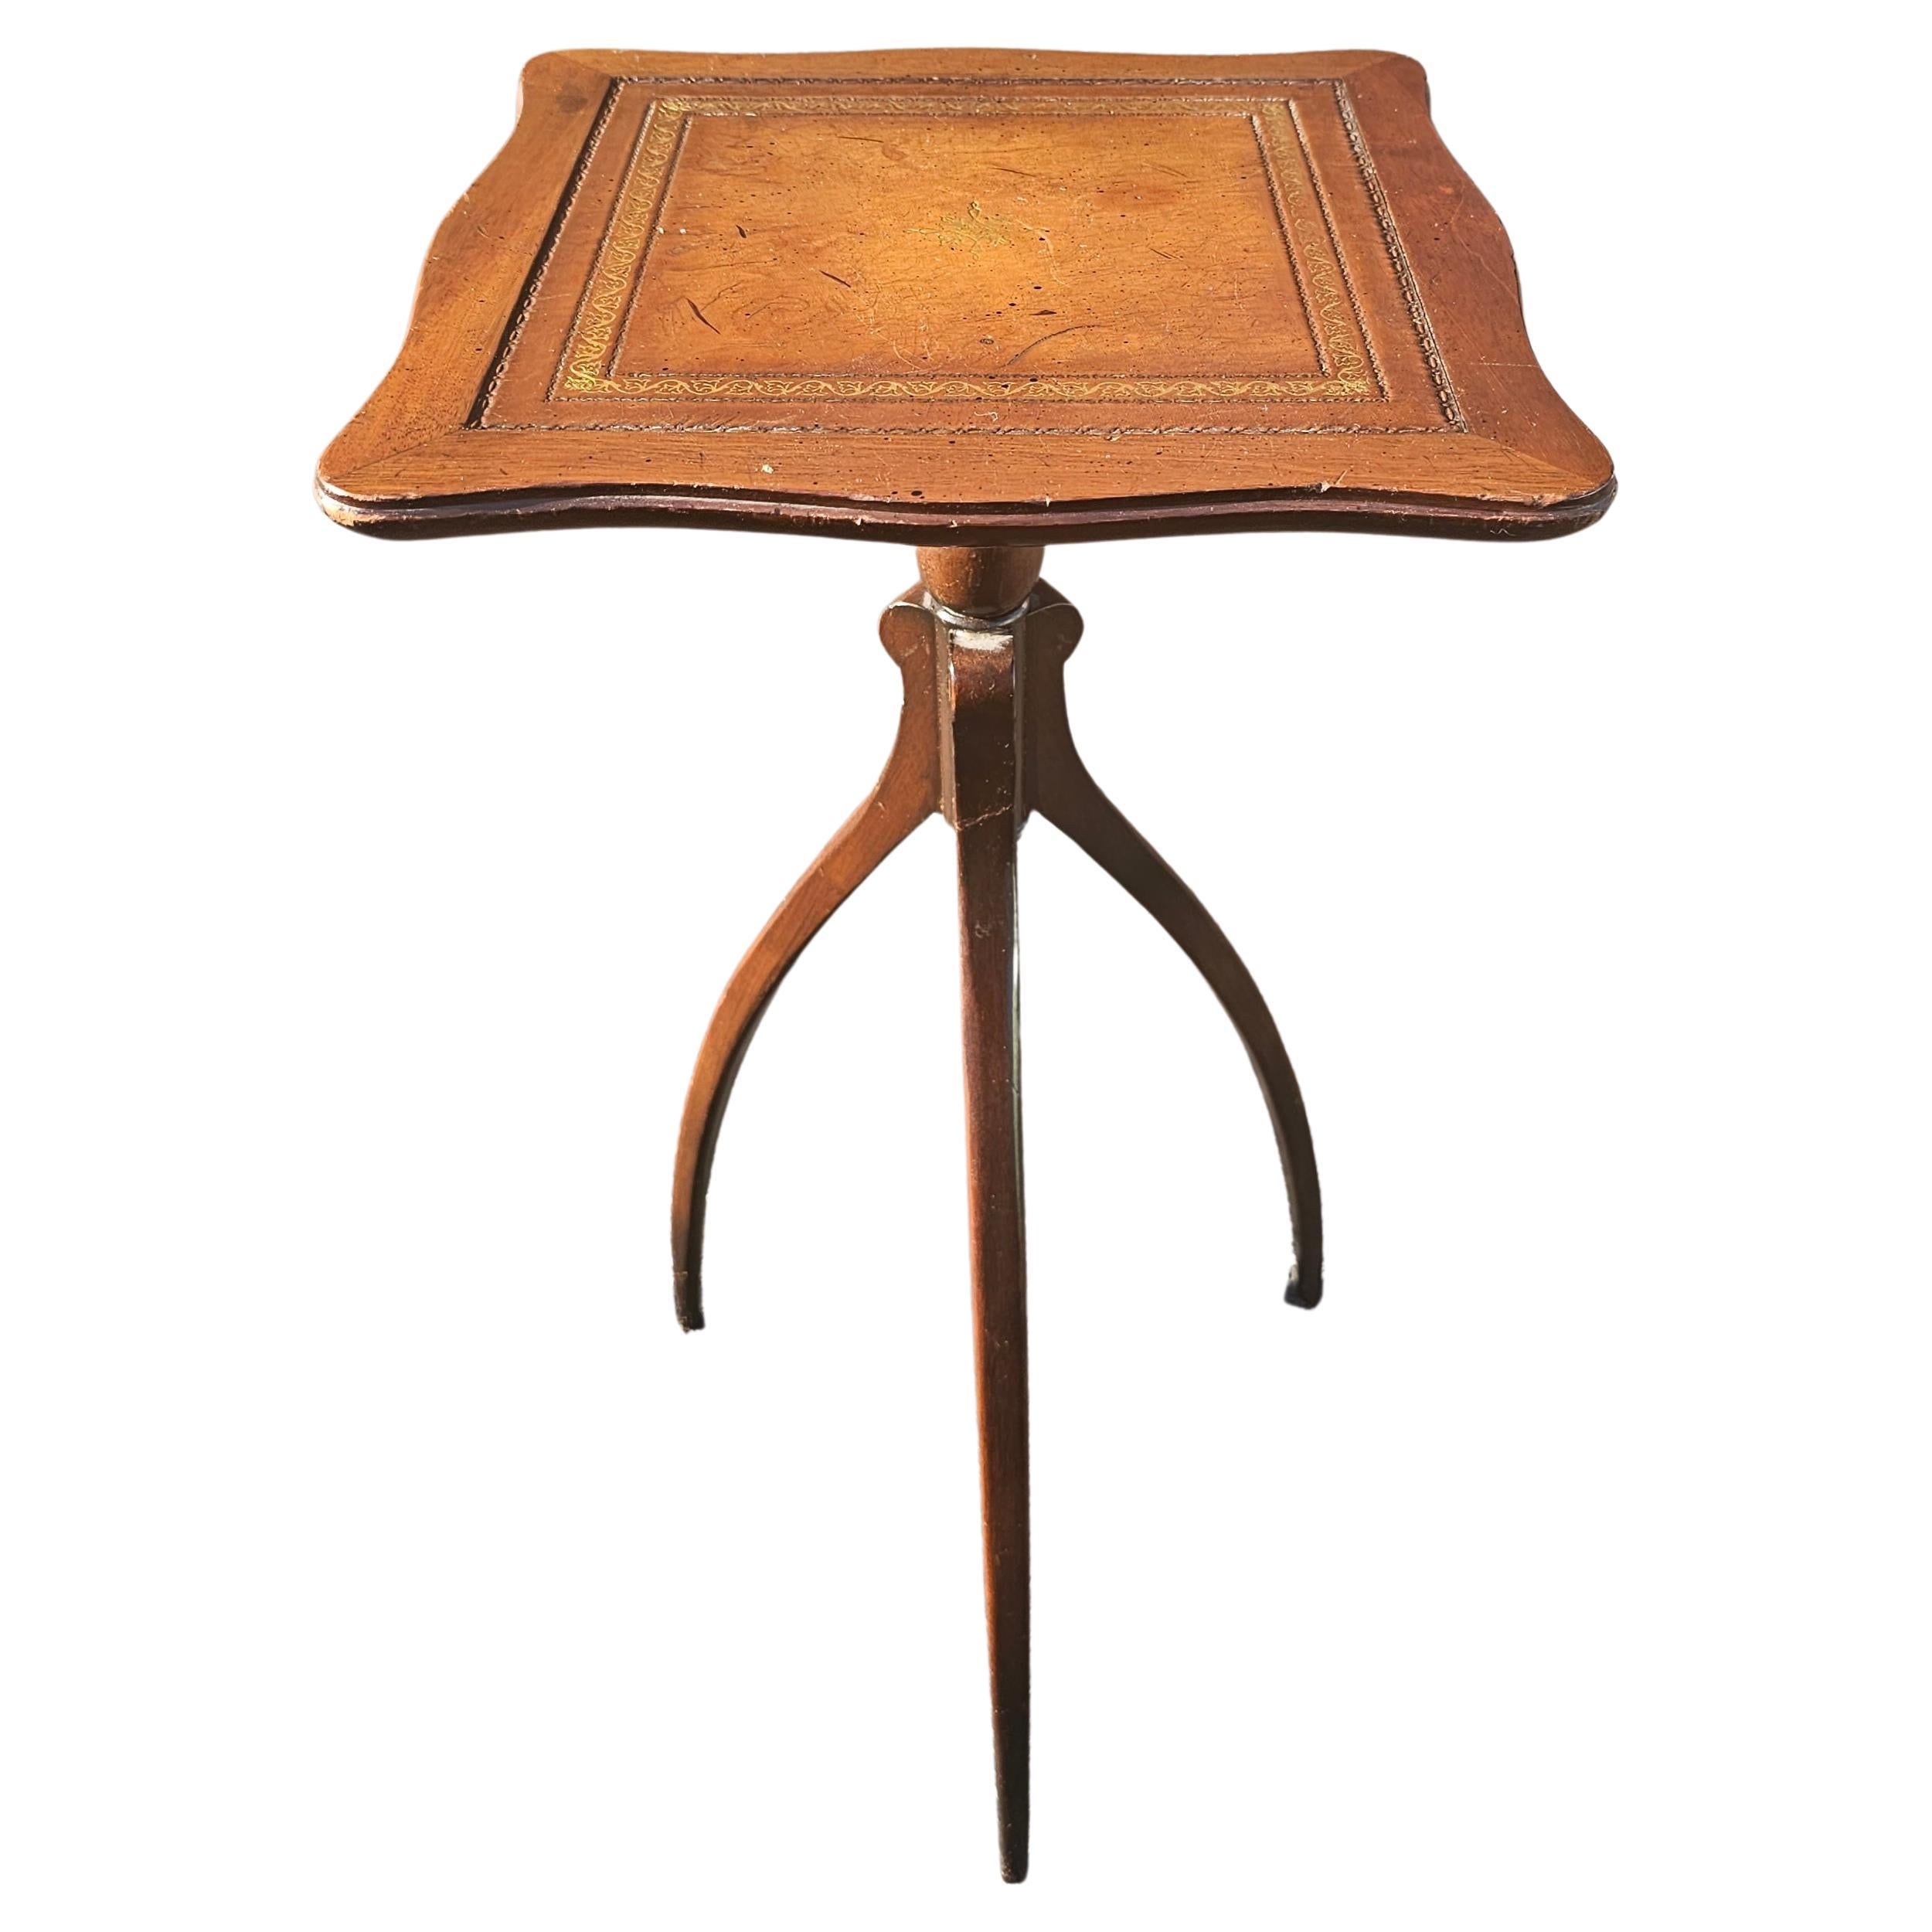 Mid 20th Century Spider Tripod Mahogany and Tooled Leather Top Candle Stand